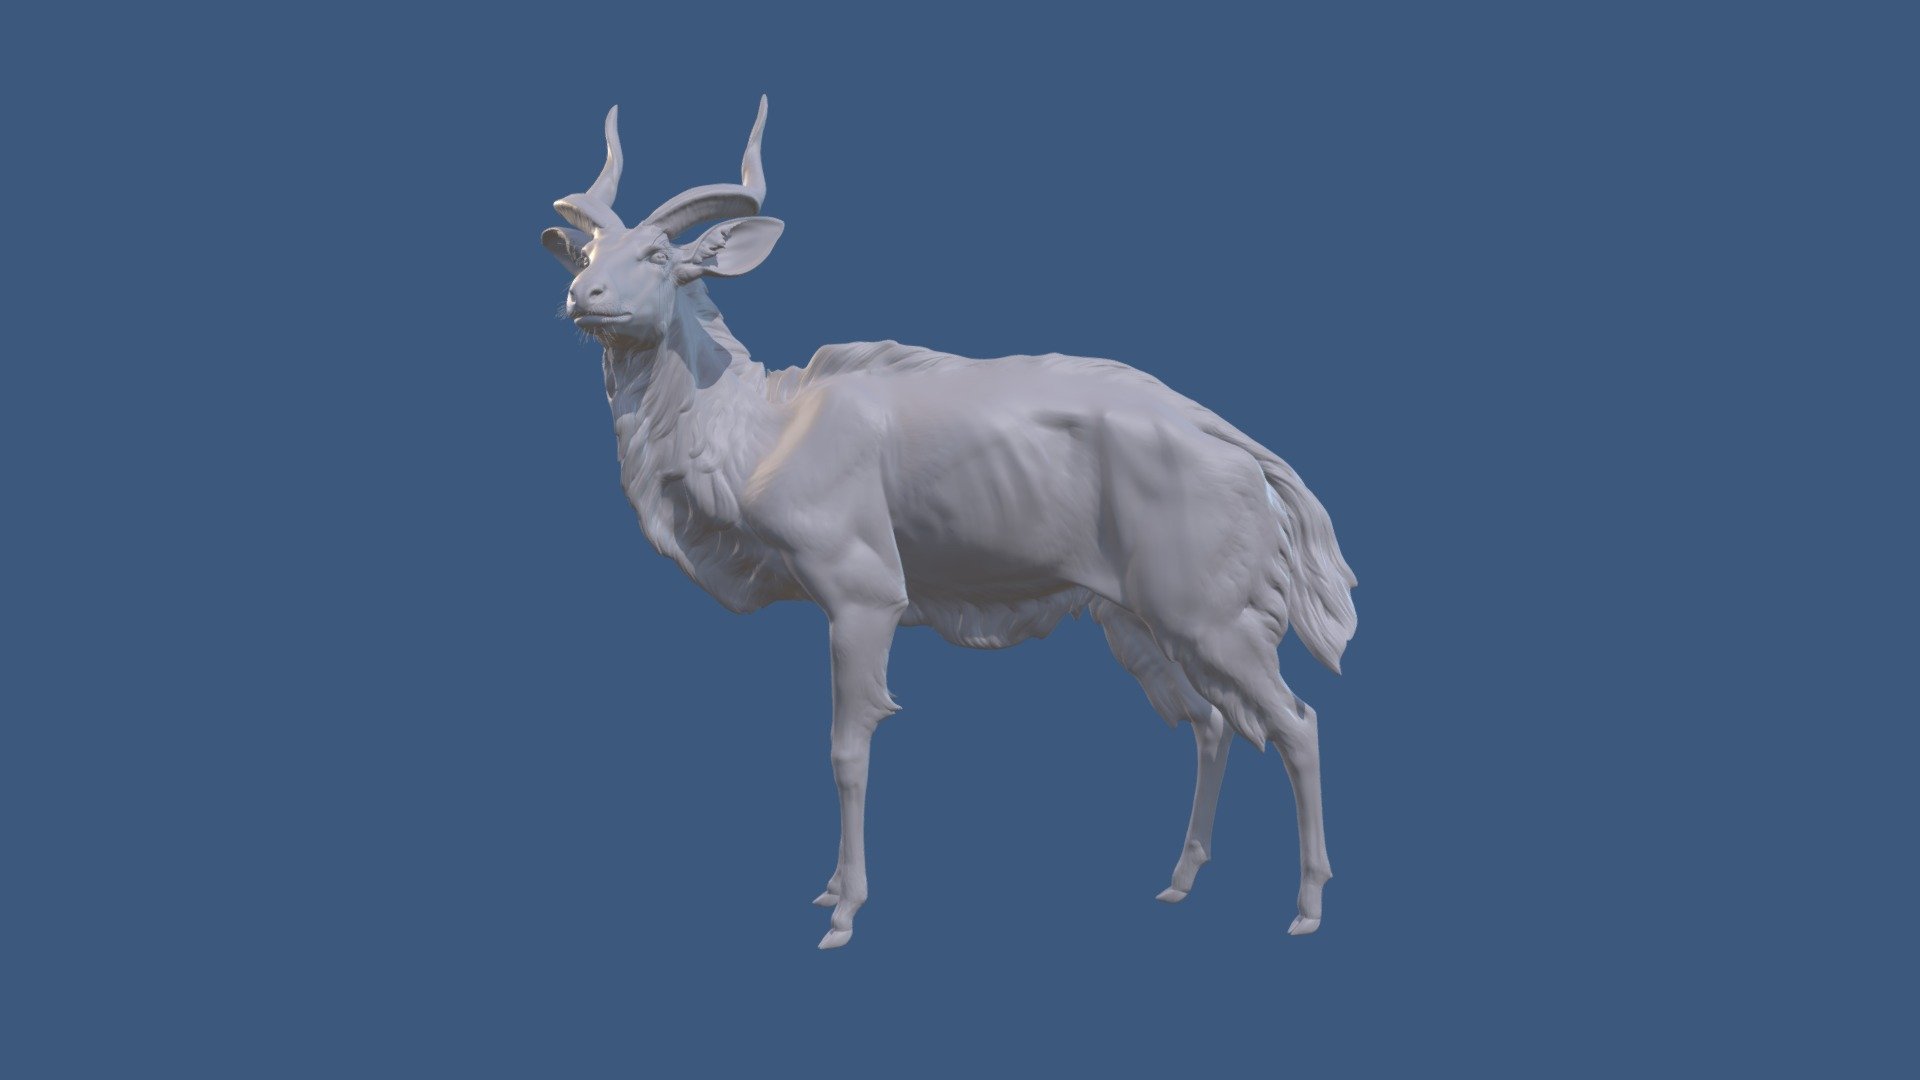 This is a Lowland Nyala anatomy study that I did for the &ldquo;Sculpting Anatomy: From Realistic to Creature